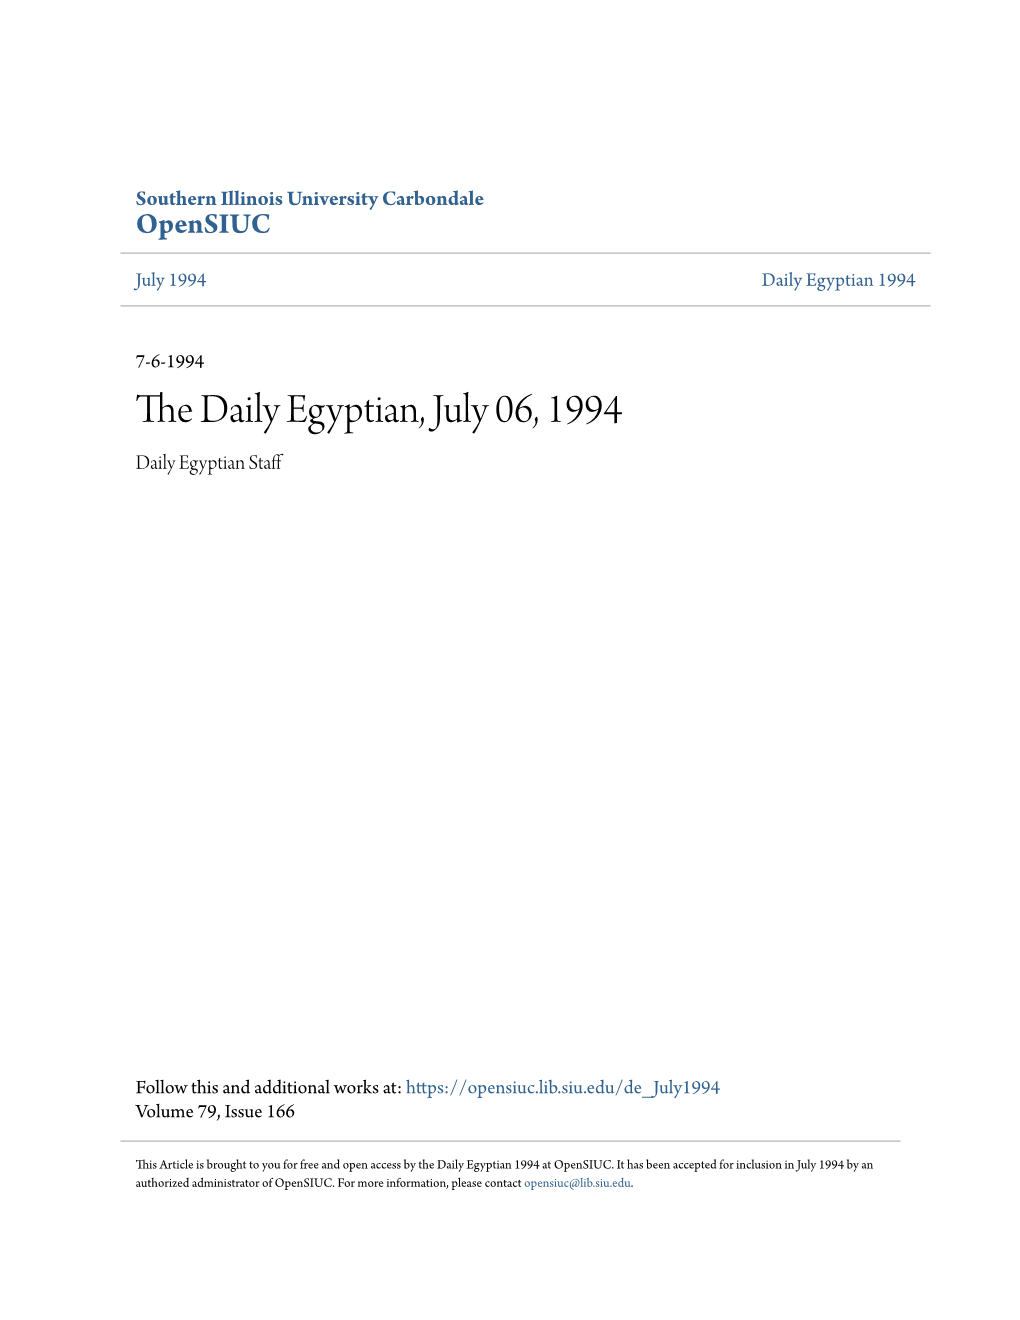 The Daily Egyptian, July 06, 1994